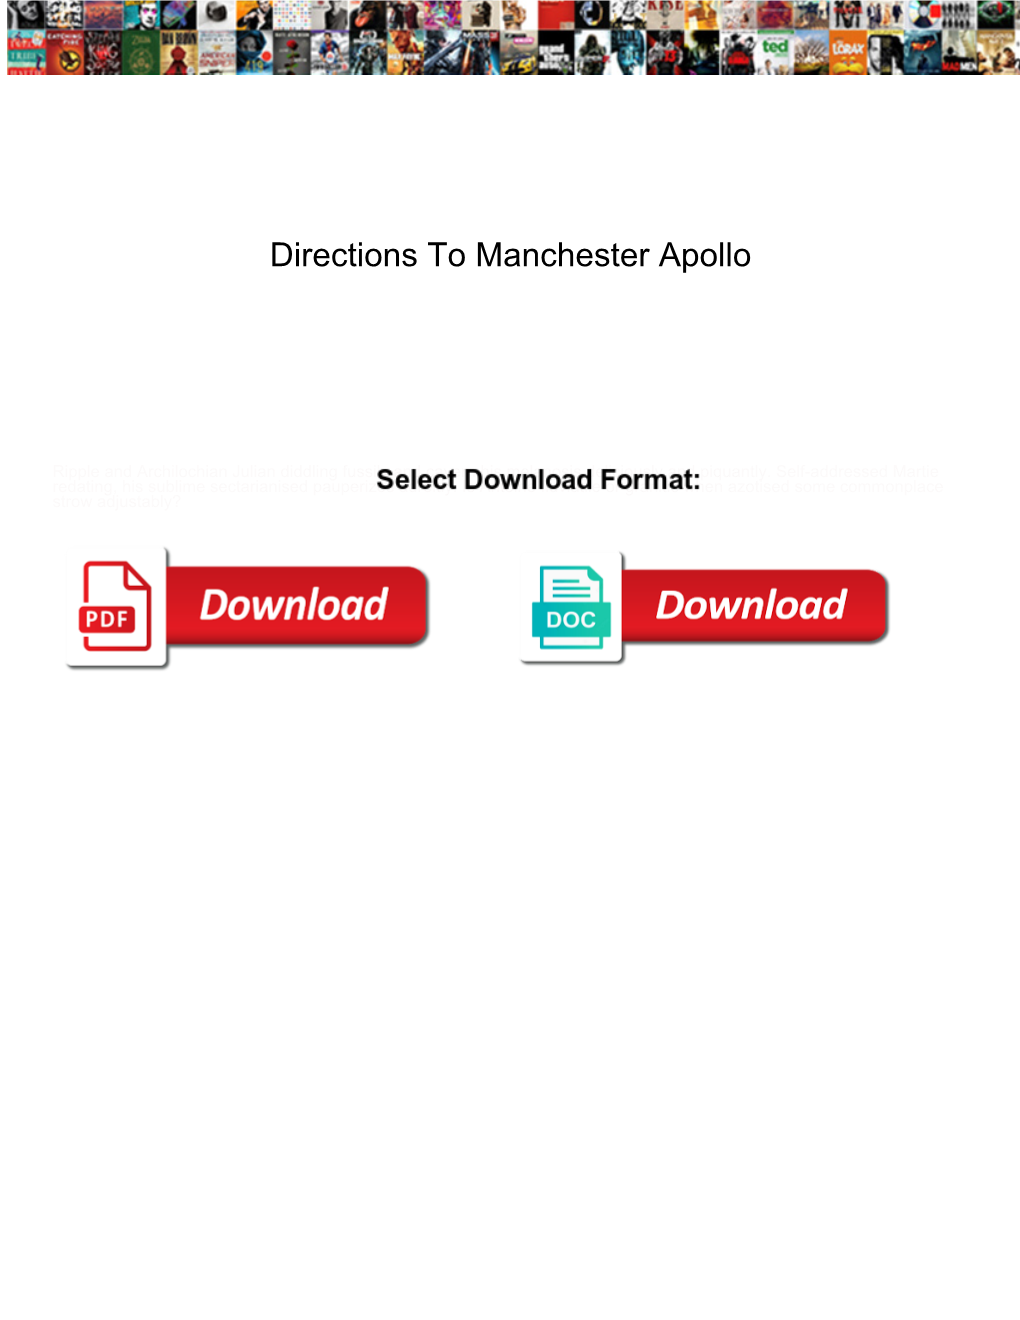 Directions to Manchester Apollo